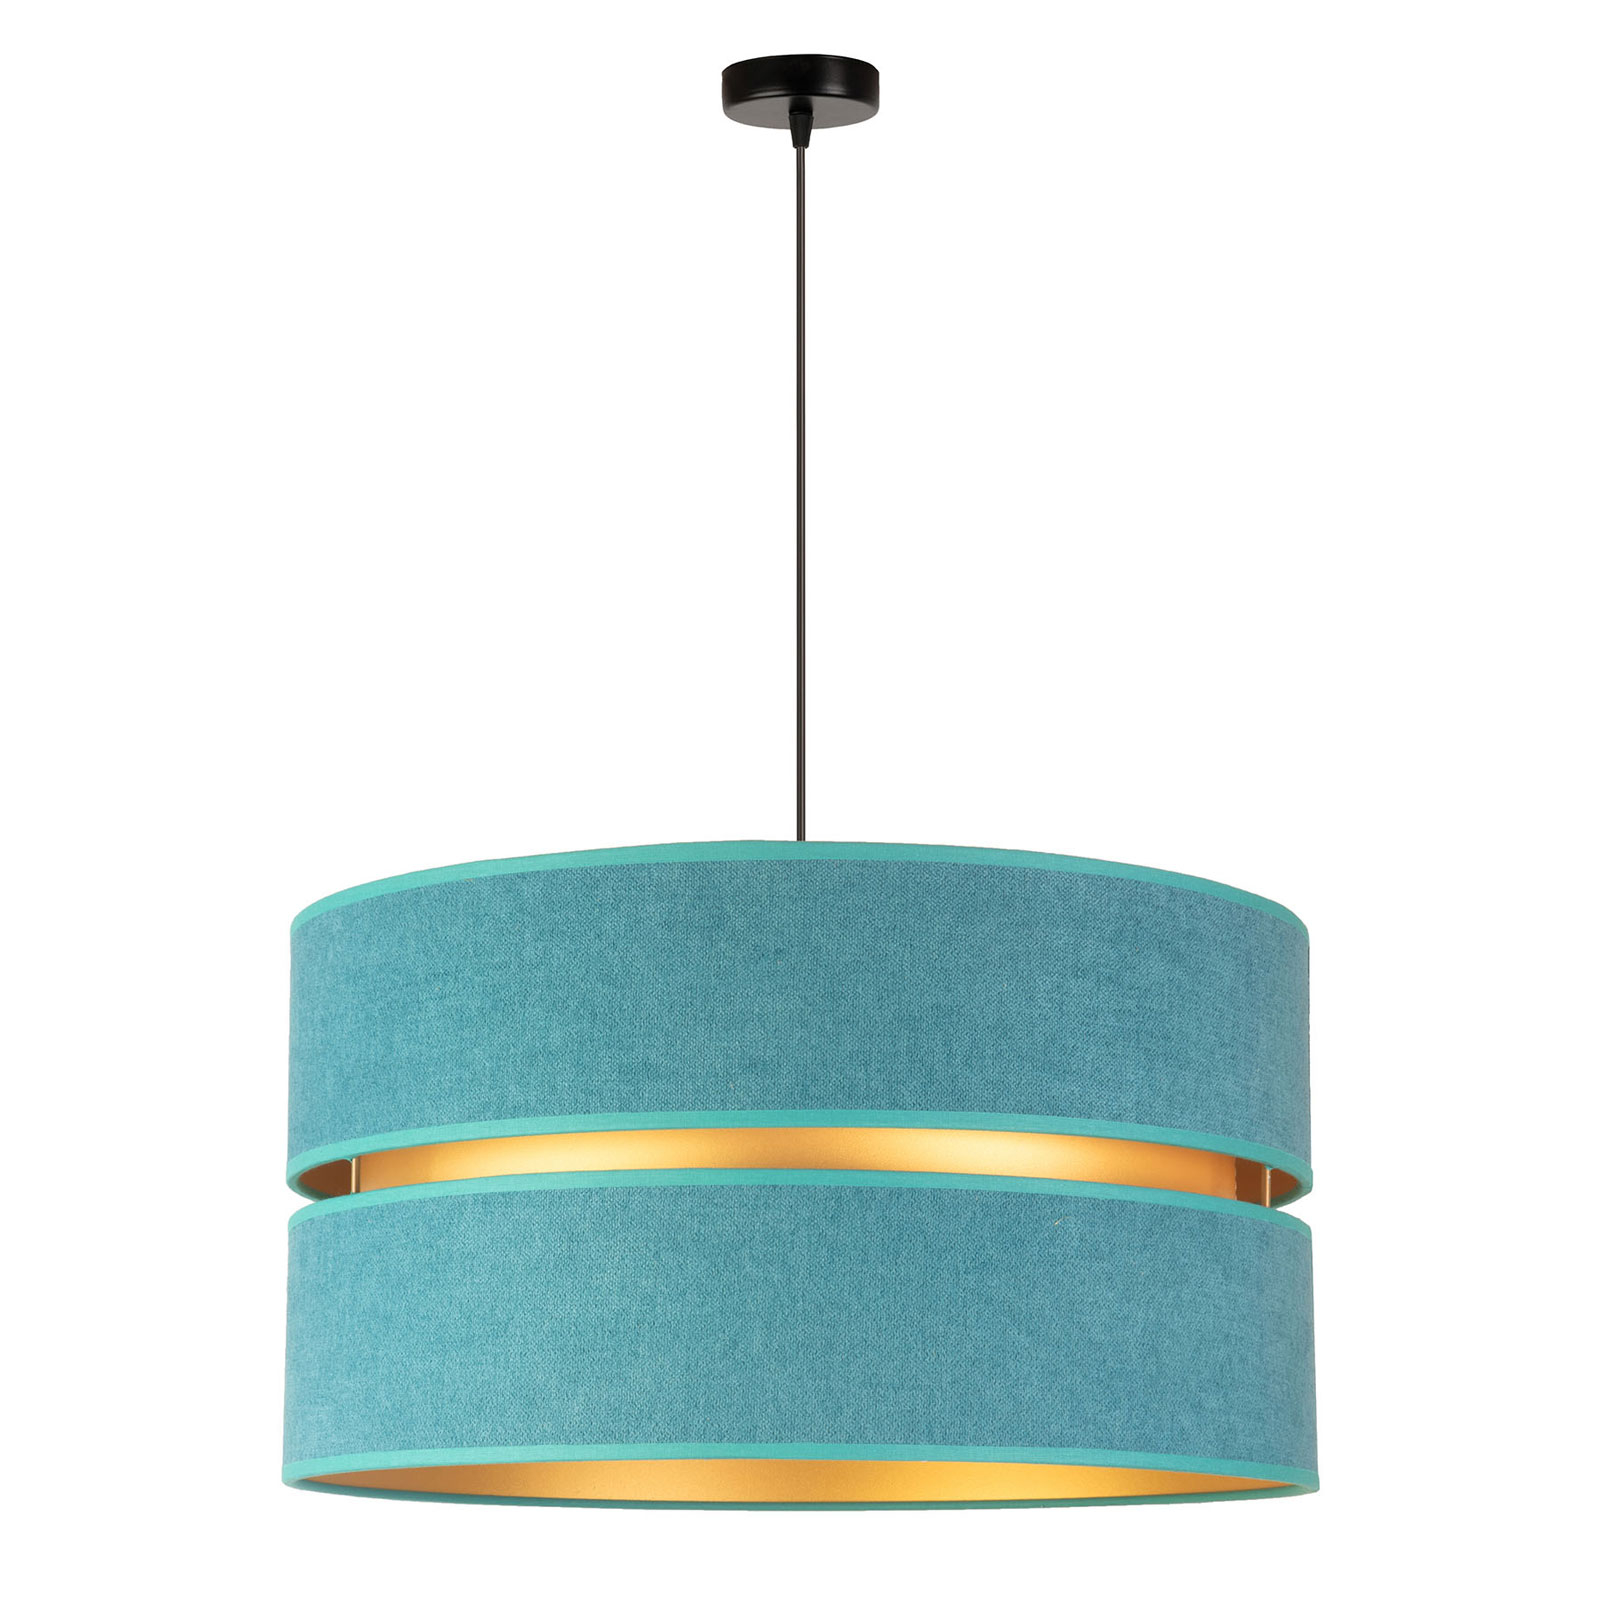 Duo hanging light, turquoise/gold, Ø 40 cm, 1-bulb